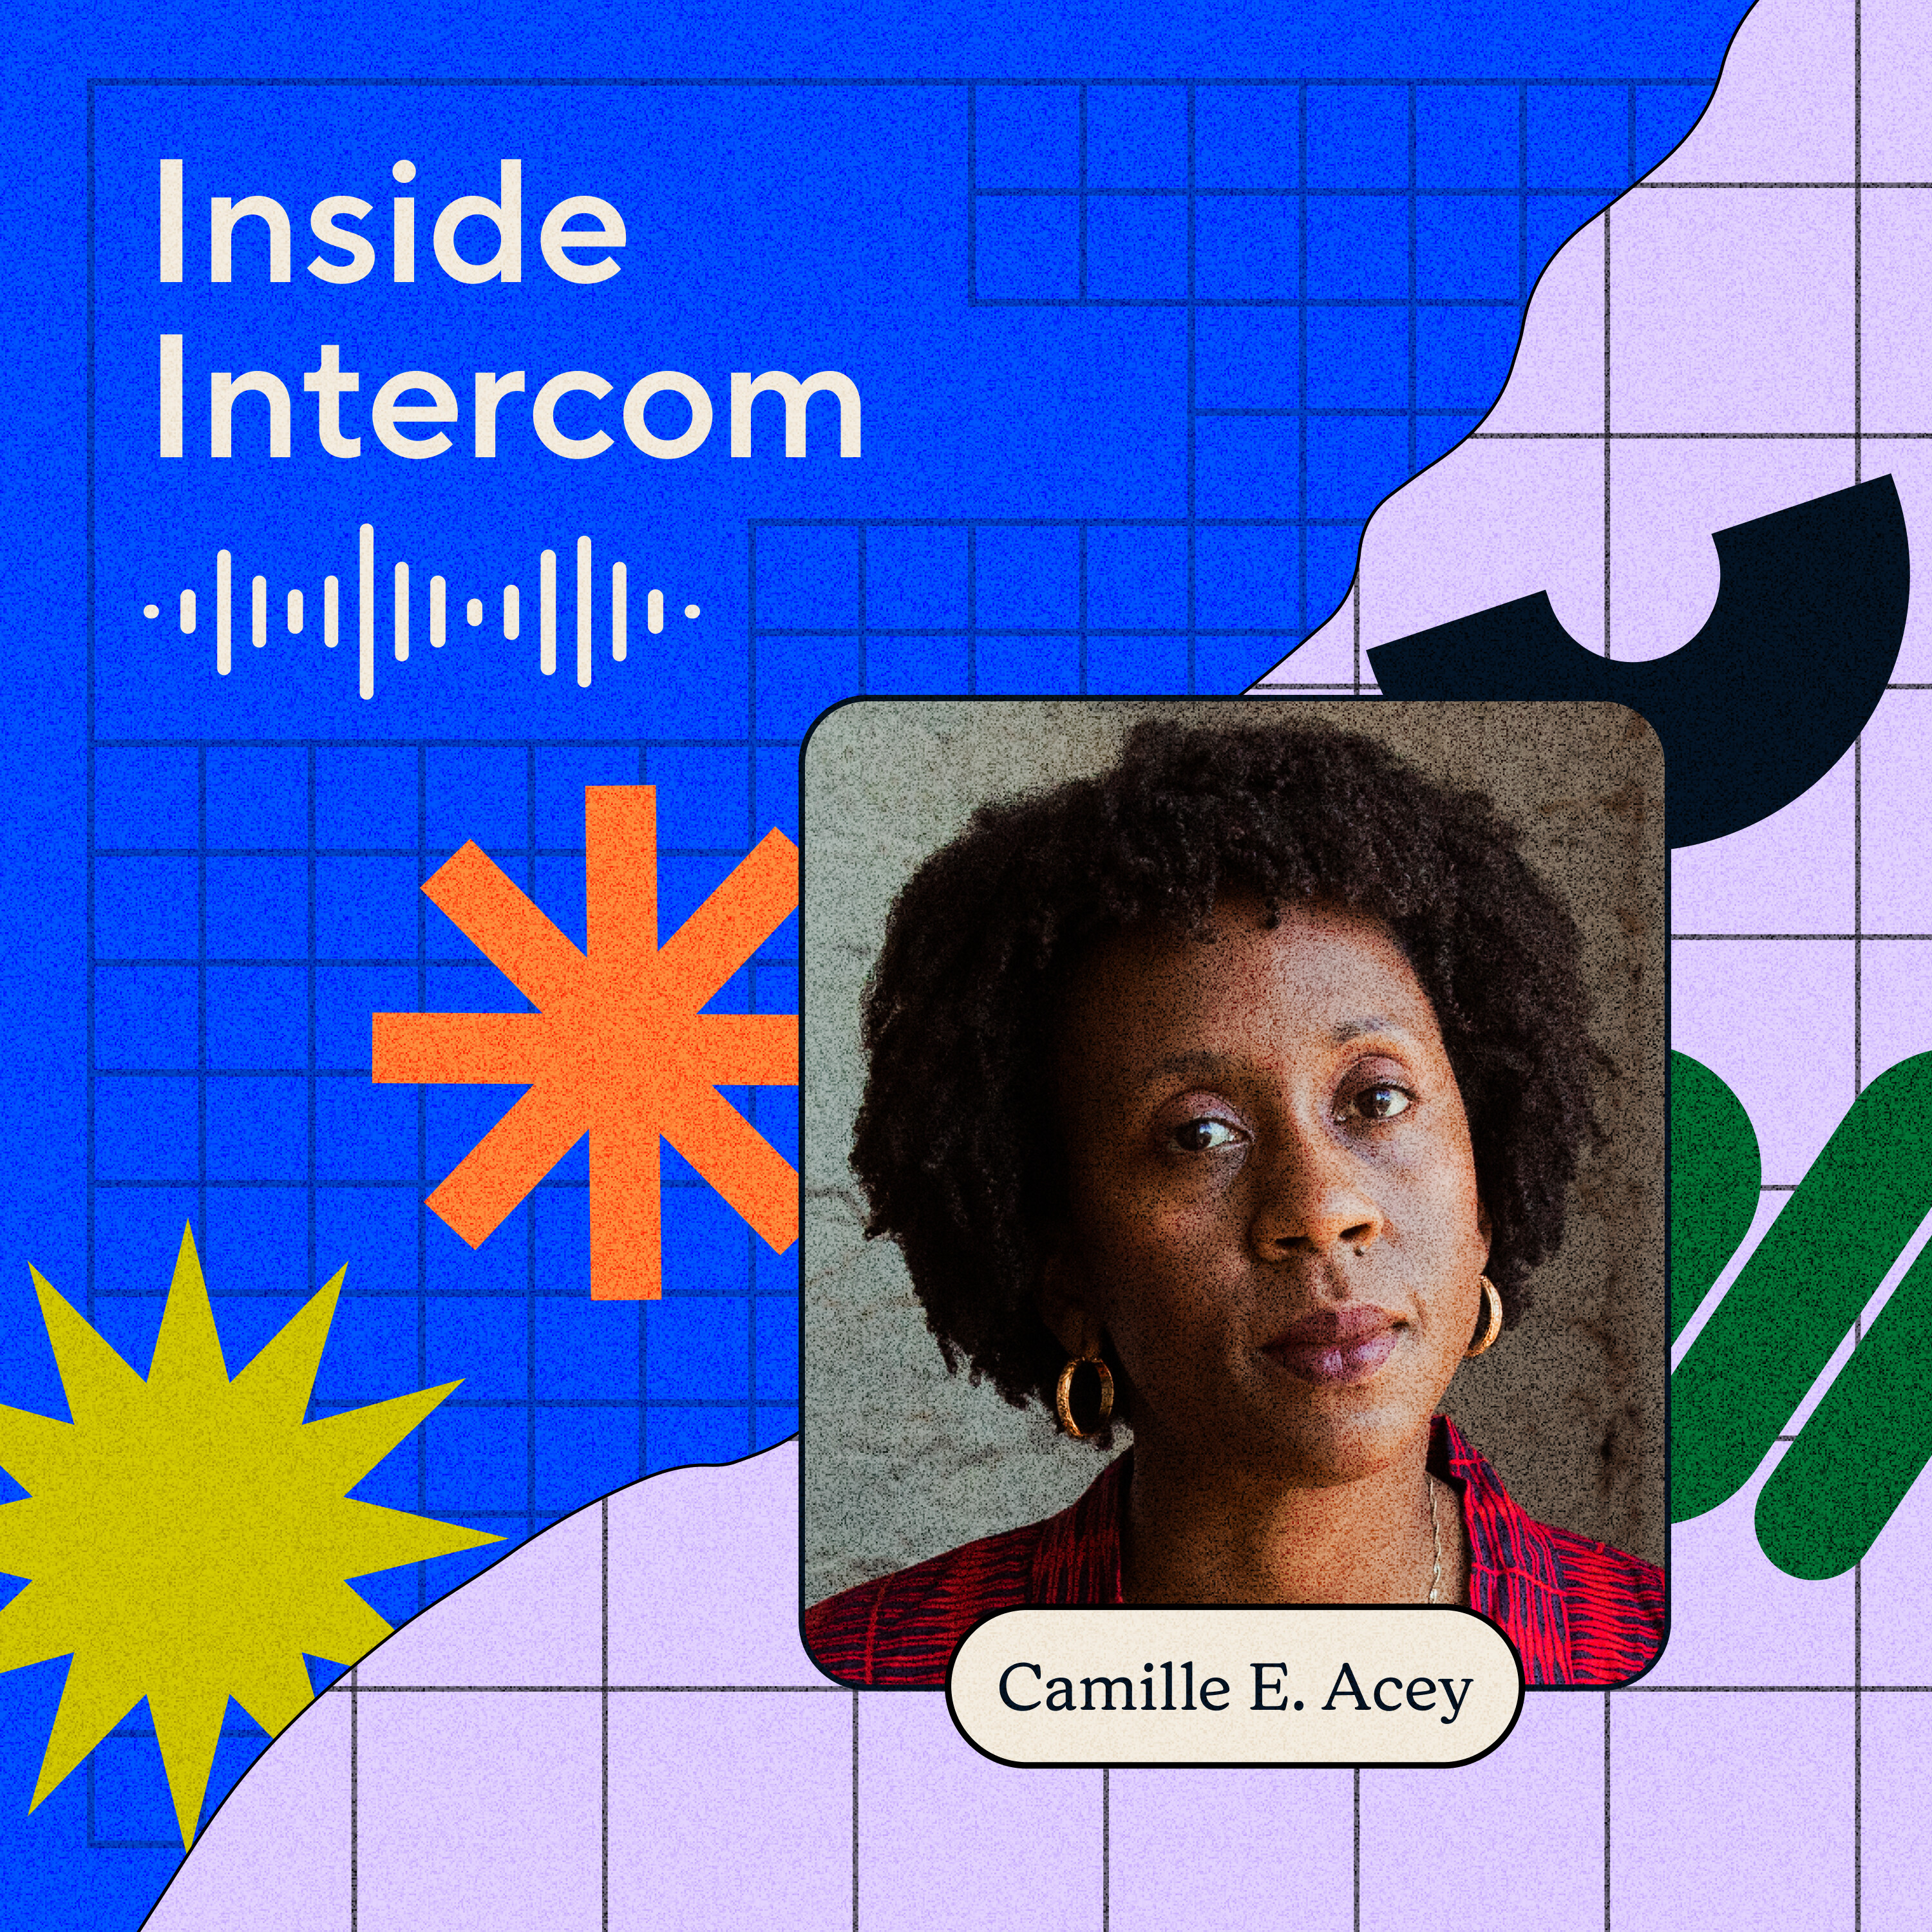 CX leader Camille E. Acey on the evolving dynamics in customer service